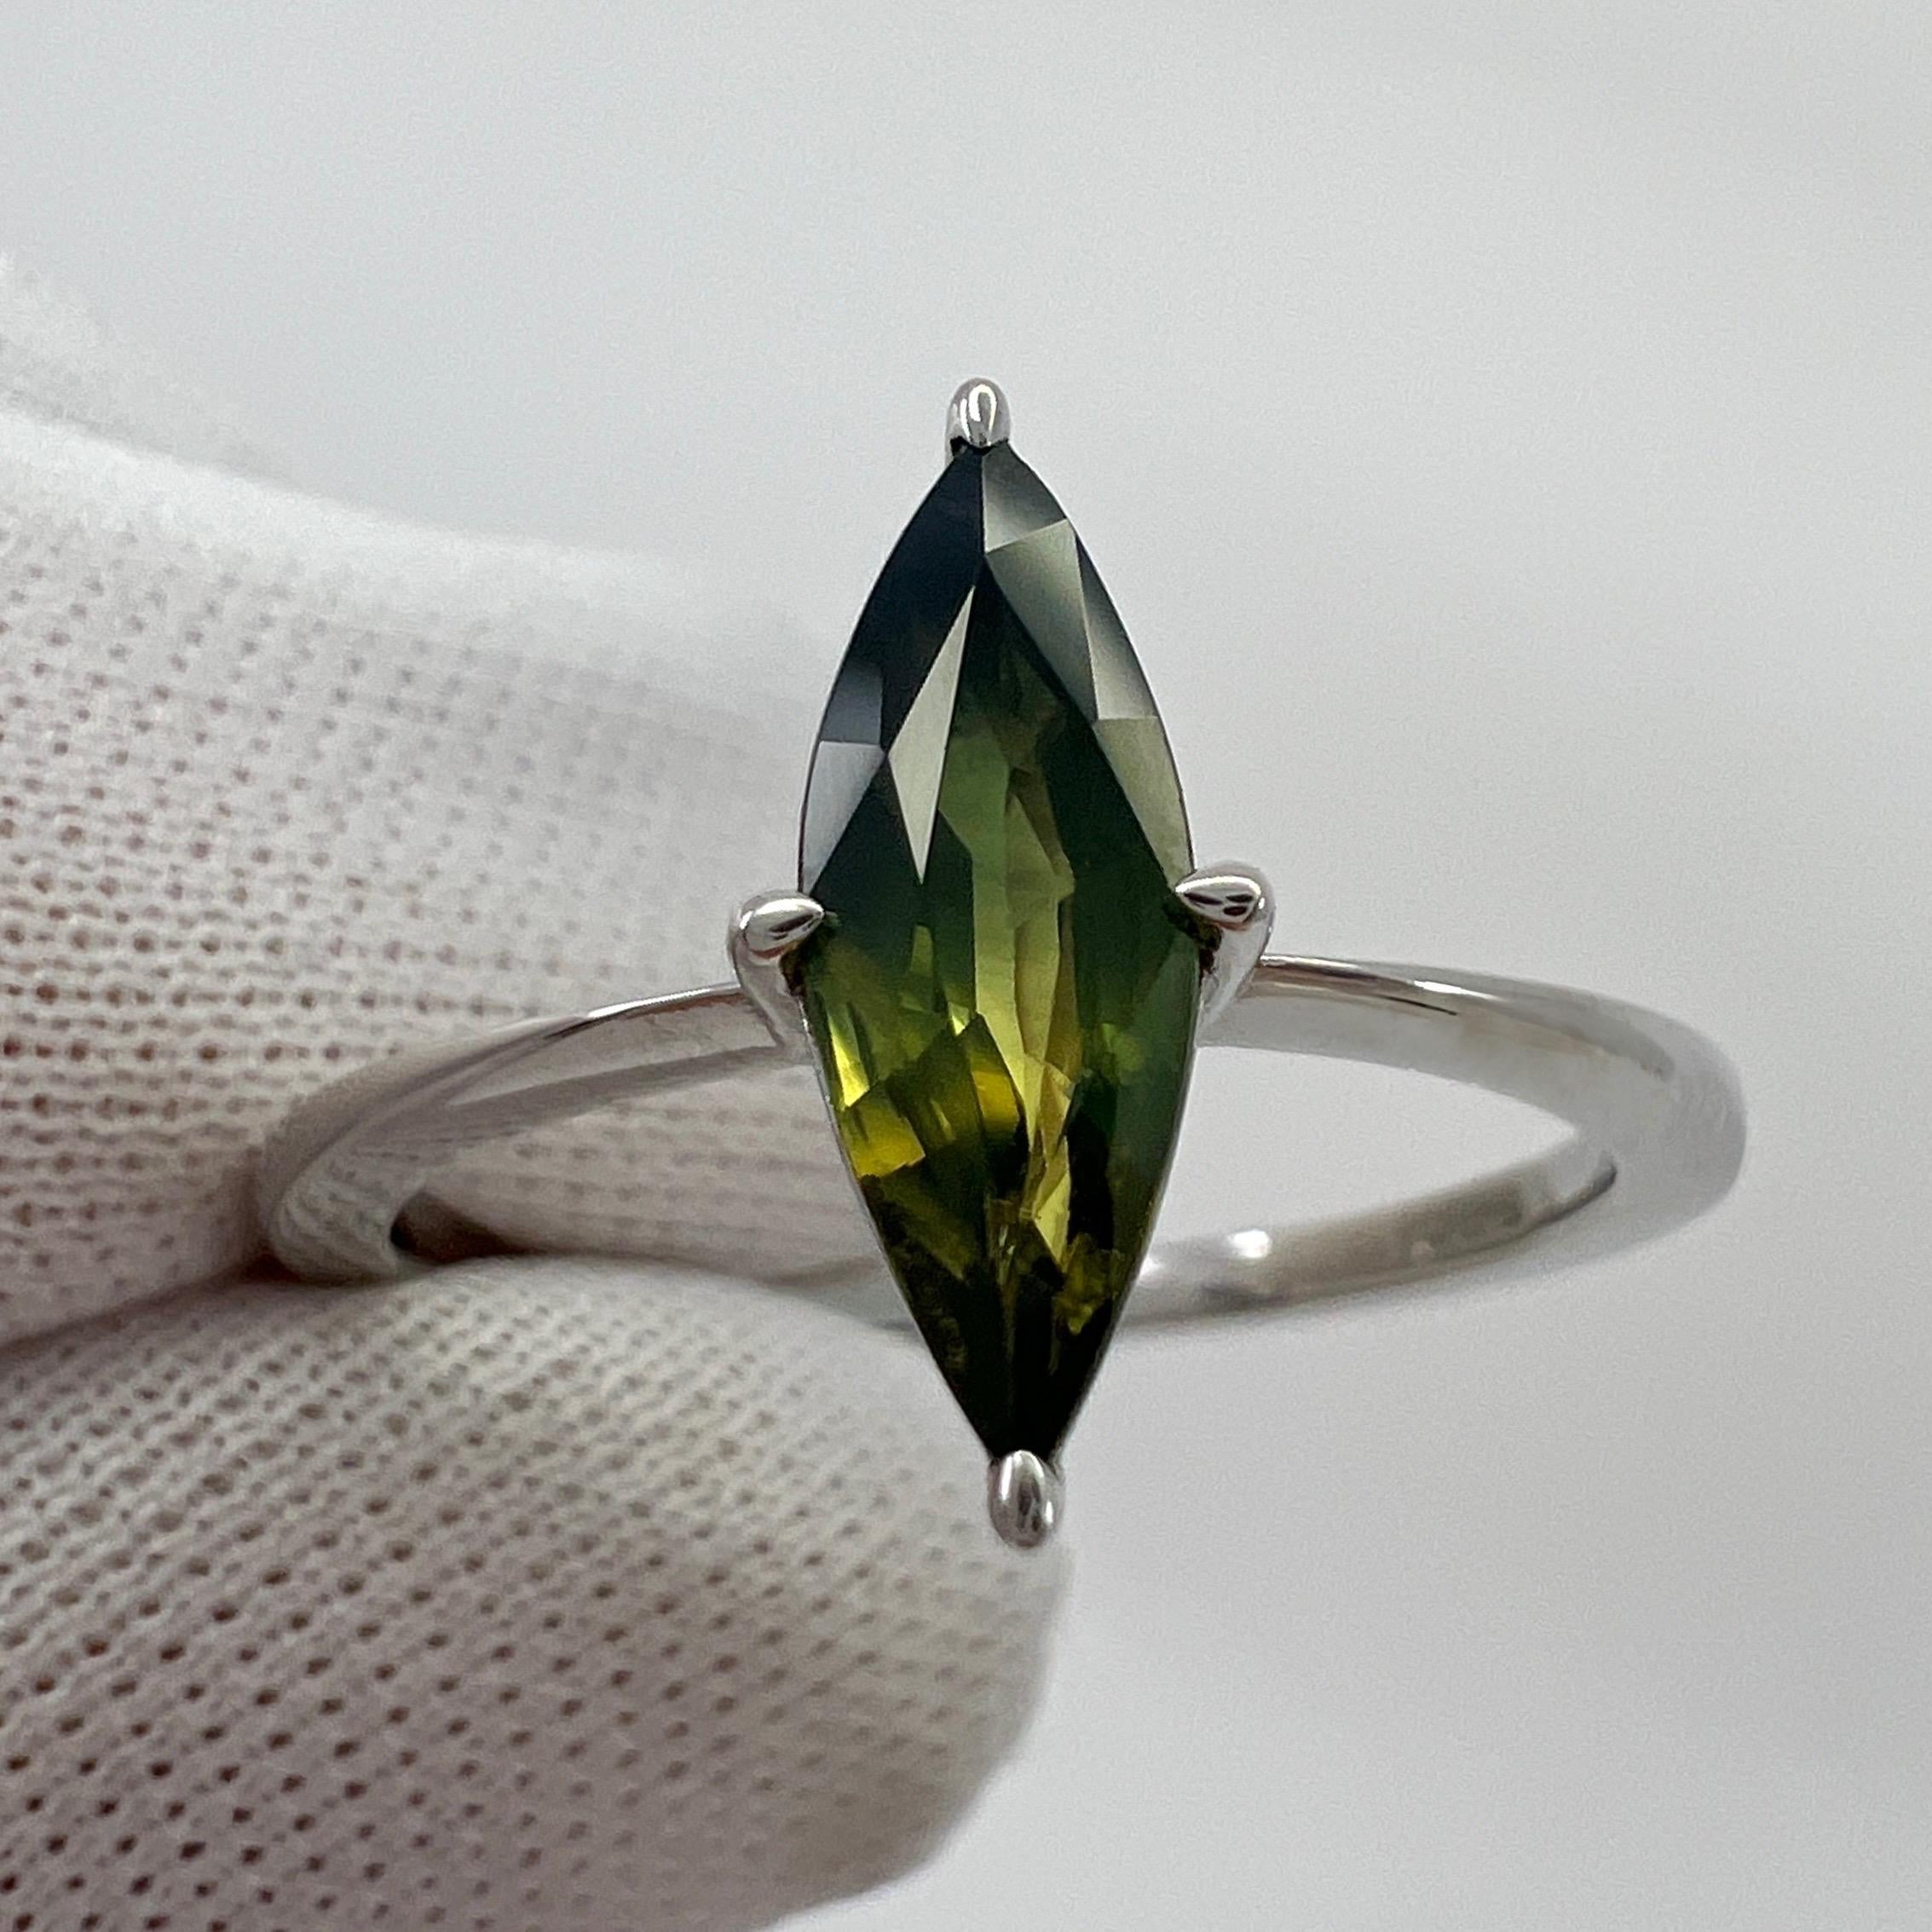 Unique Natural Parti Colour Australian Untreated Sapphire 18k White Gold Ring. ITSIT designed. 

Unique 1.04 Carat sapphire with a rare blue, green yellow parti colour effect. Stunning to see. 

Fully certified by IGI confirming the sapphire as